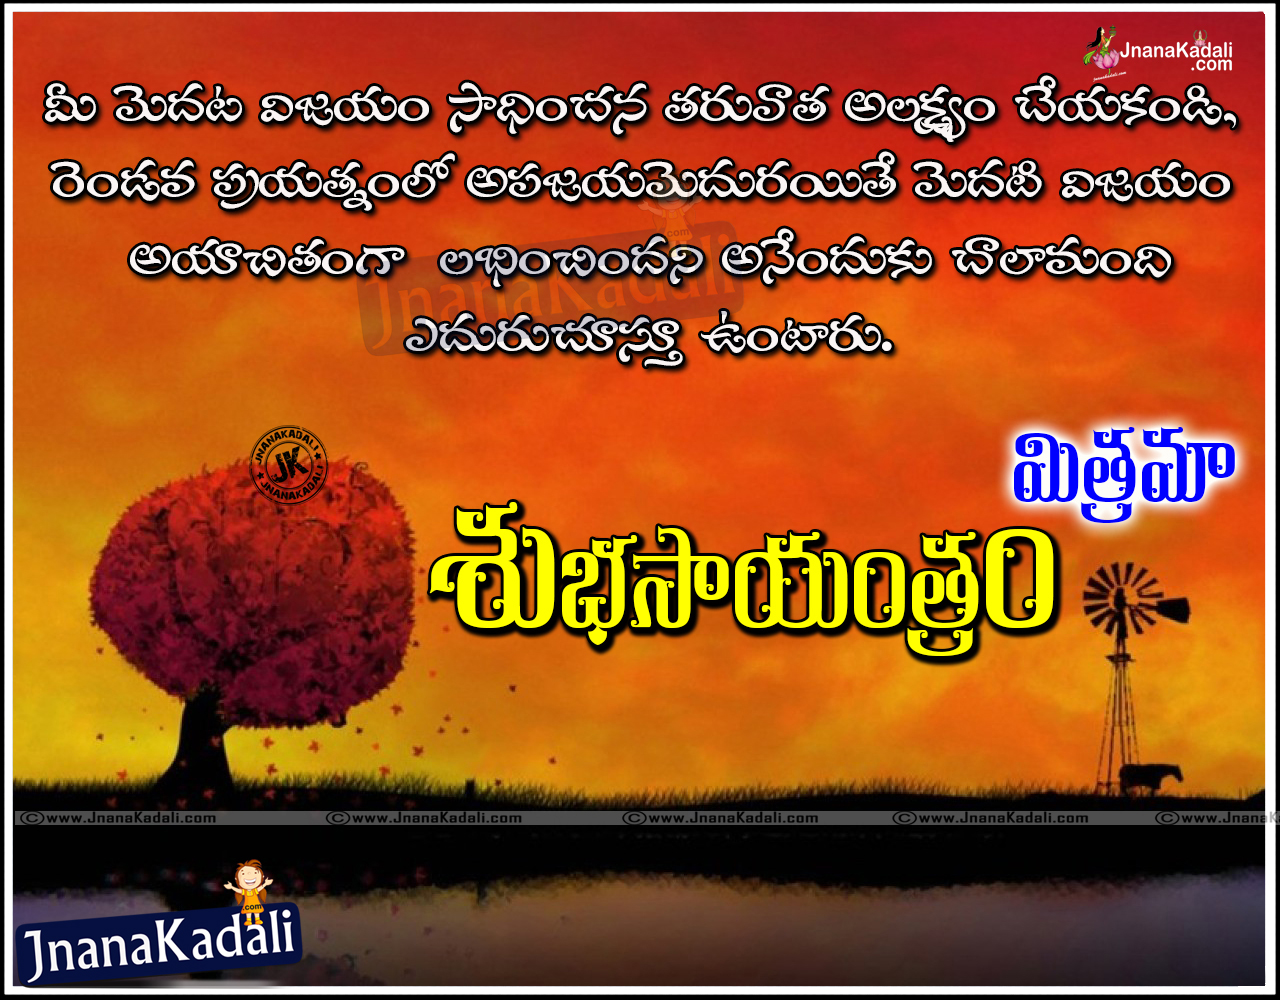 Telugu Nice Good Evening Thoughts and Quotes with wallpapers | JNANA ...